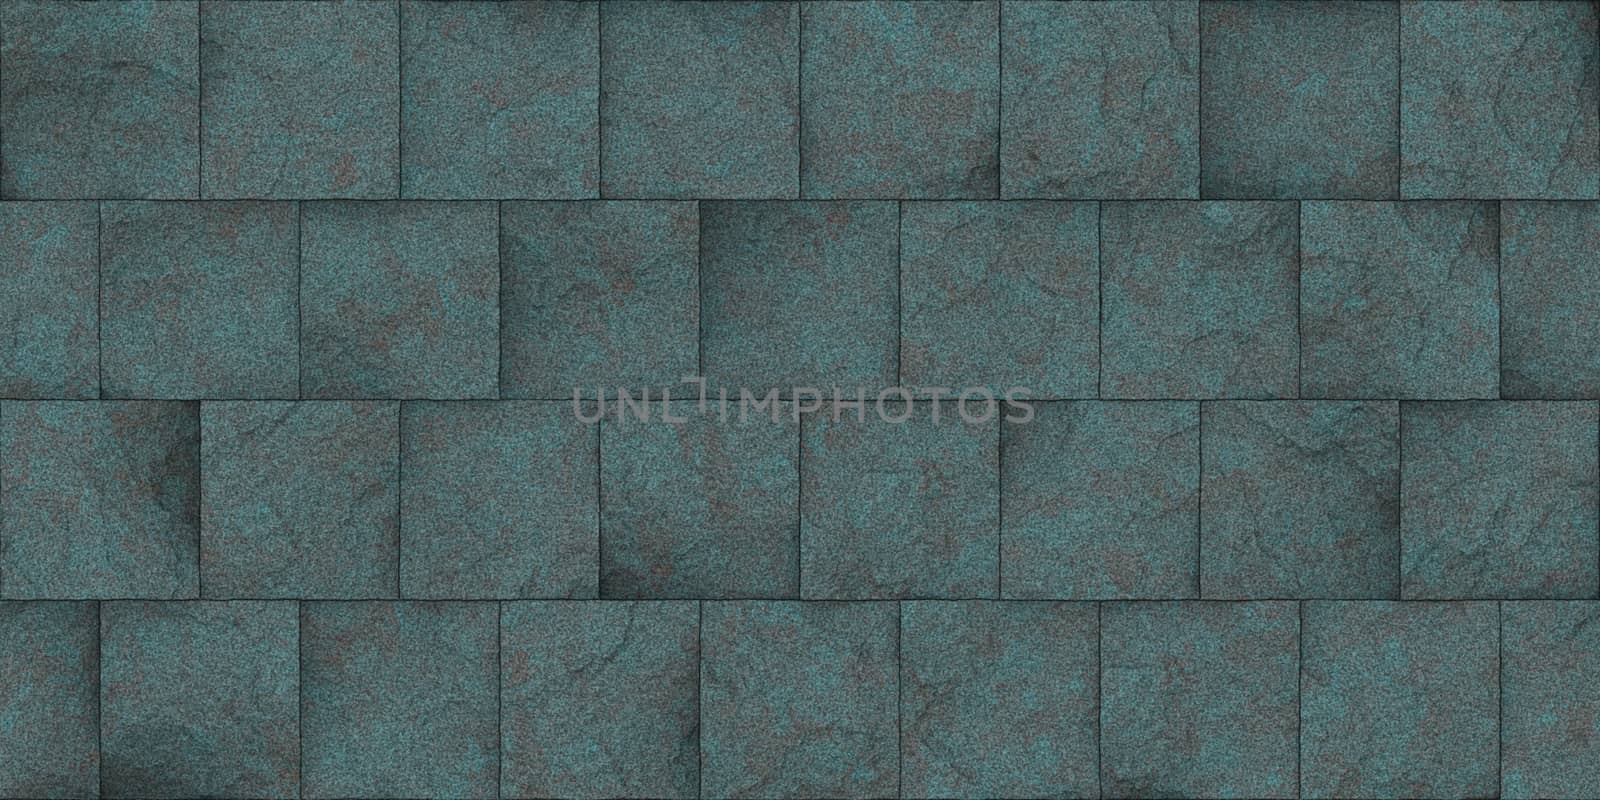 Grey Blue Seamless Square Stone Block Wall Texture. Building Facade Background. Exterior Architecture Decorative House Facing.